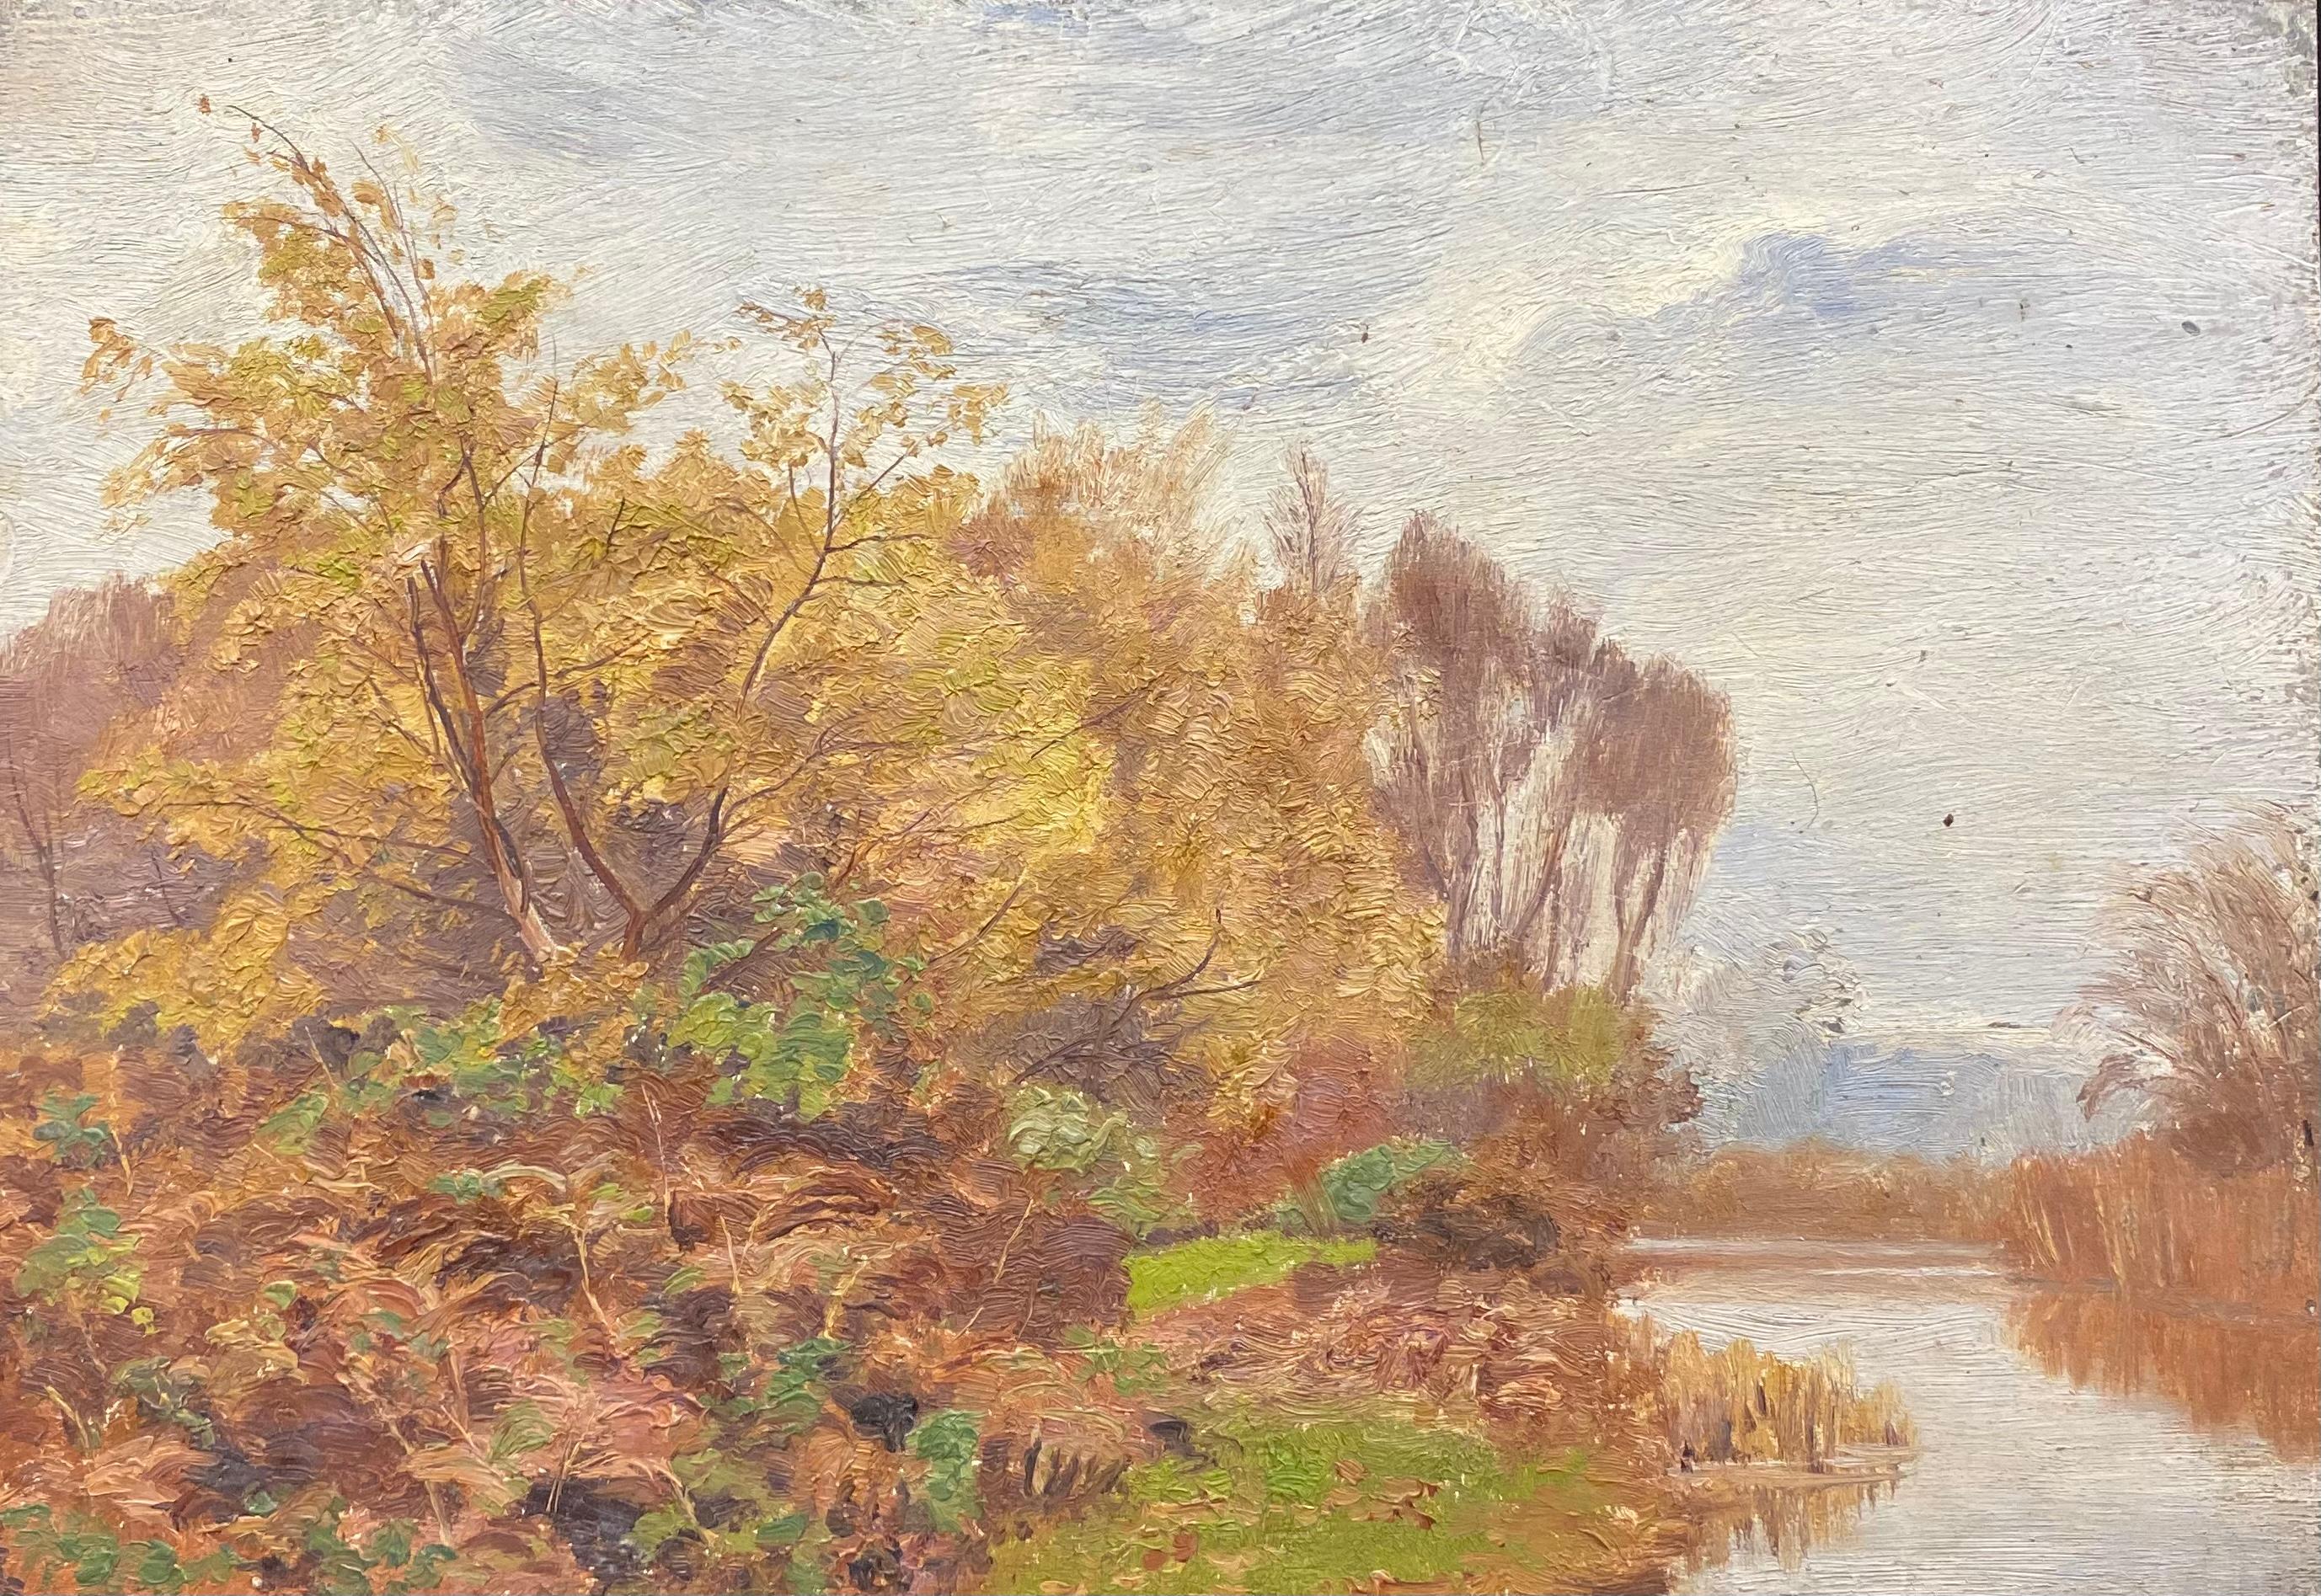 Antique English Still-Life Painting - Early 1900's English Impressionist Oil Painting Autumnal Woodland Lake Scene